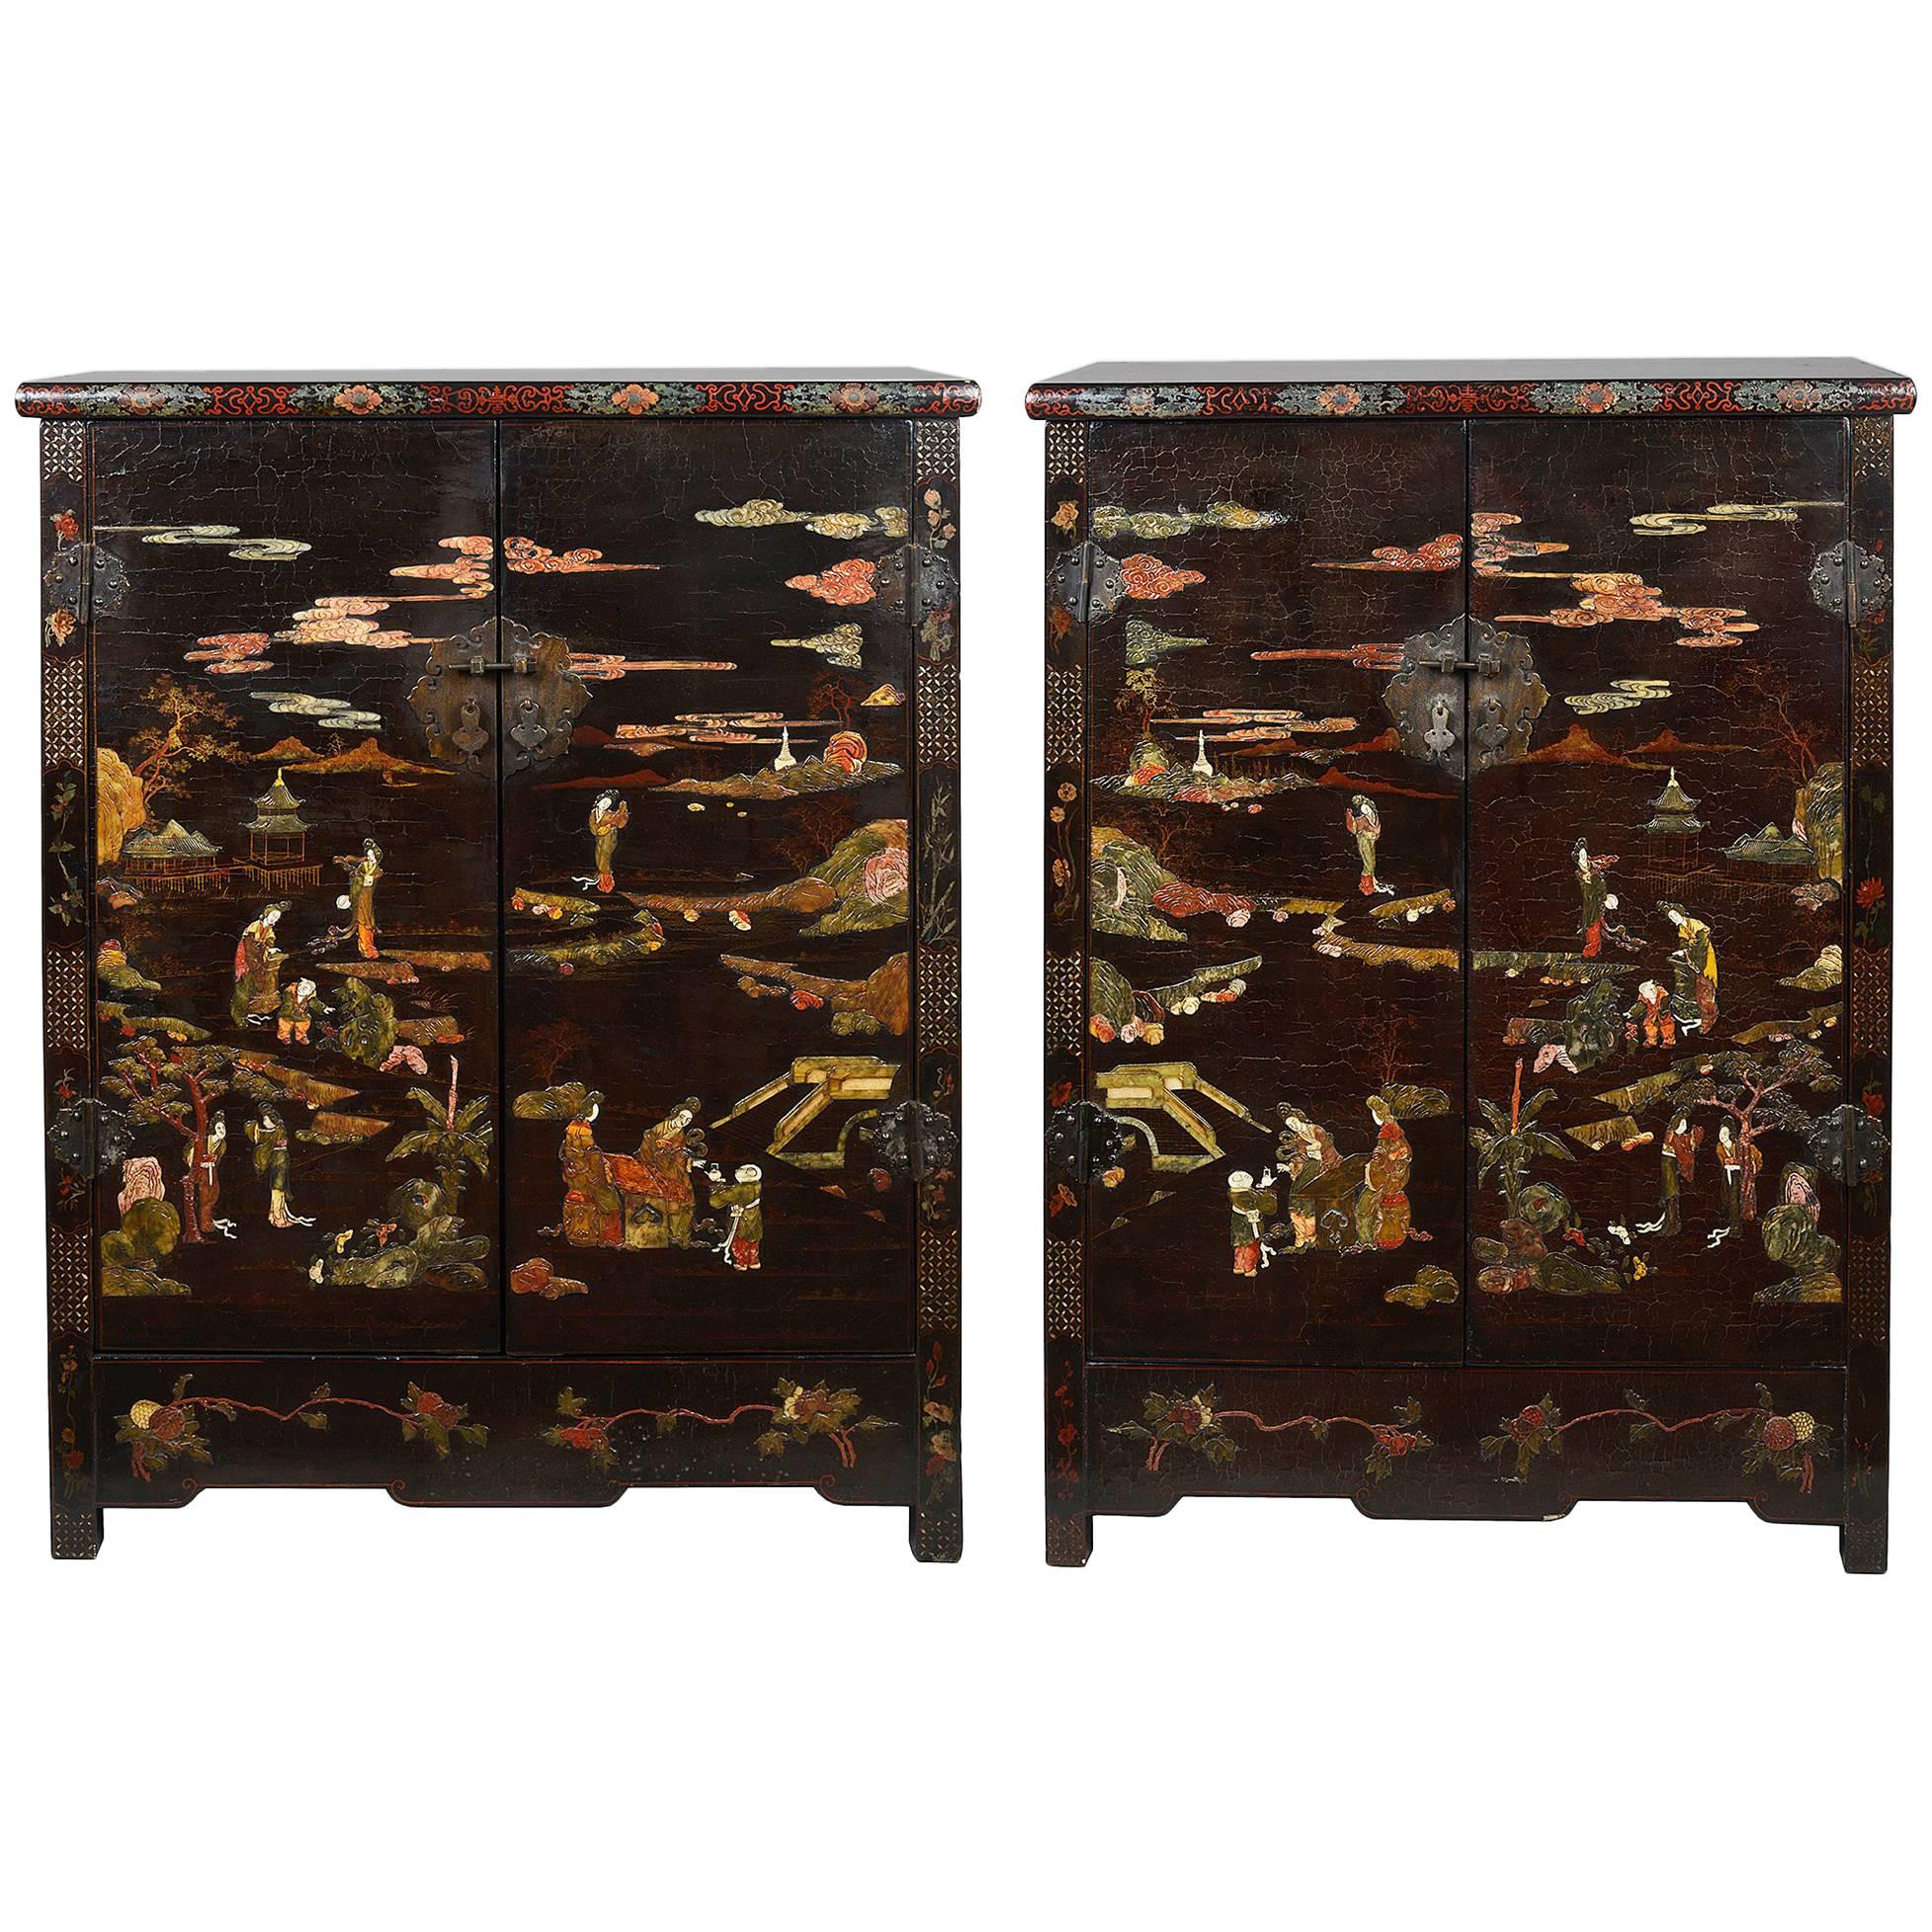 Pair of Regency Period Chinese Coromandel Lacquer Cabinets